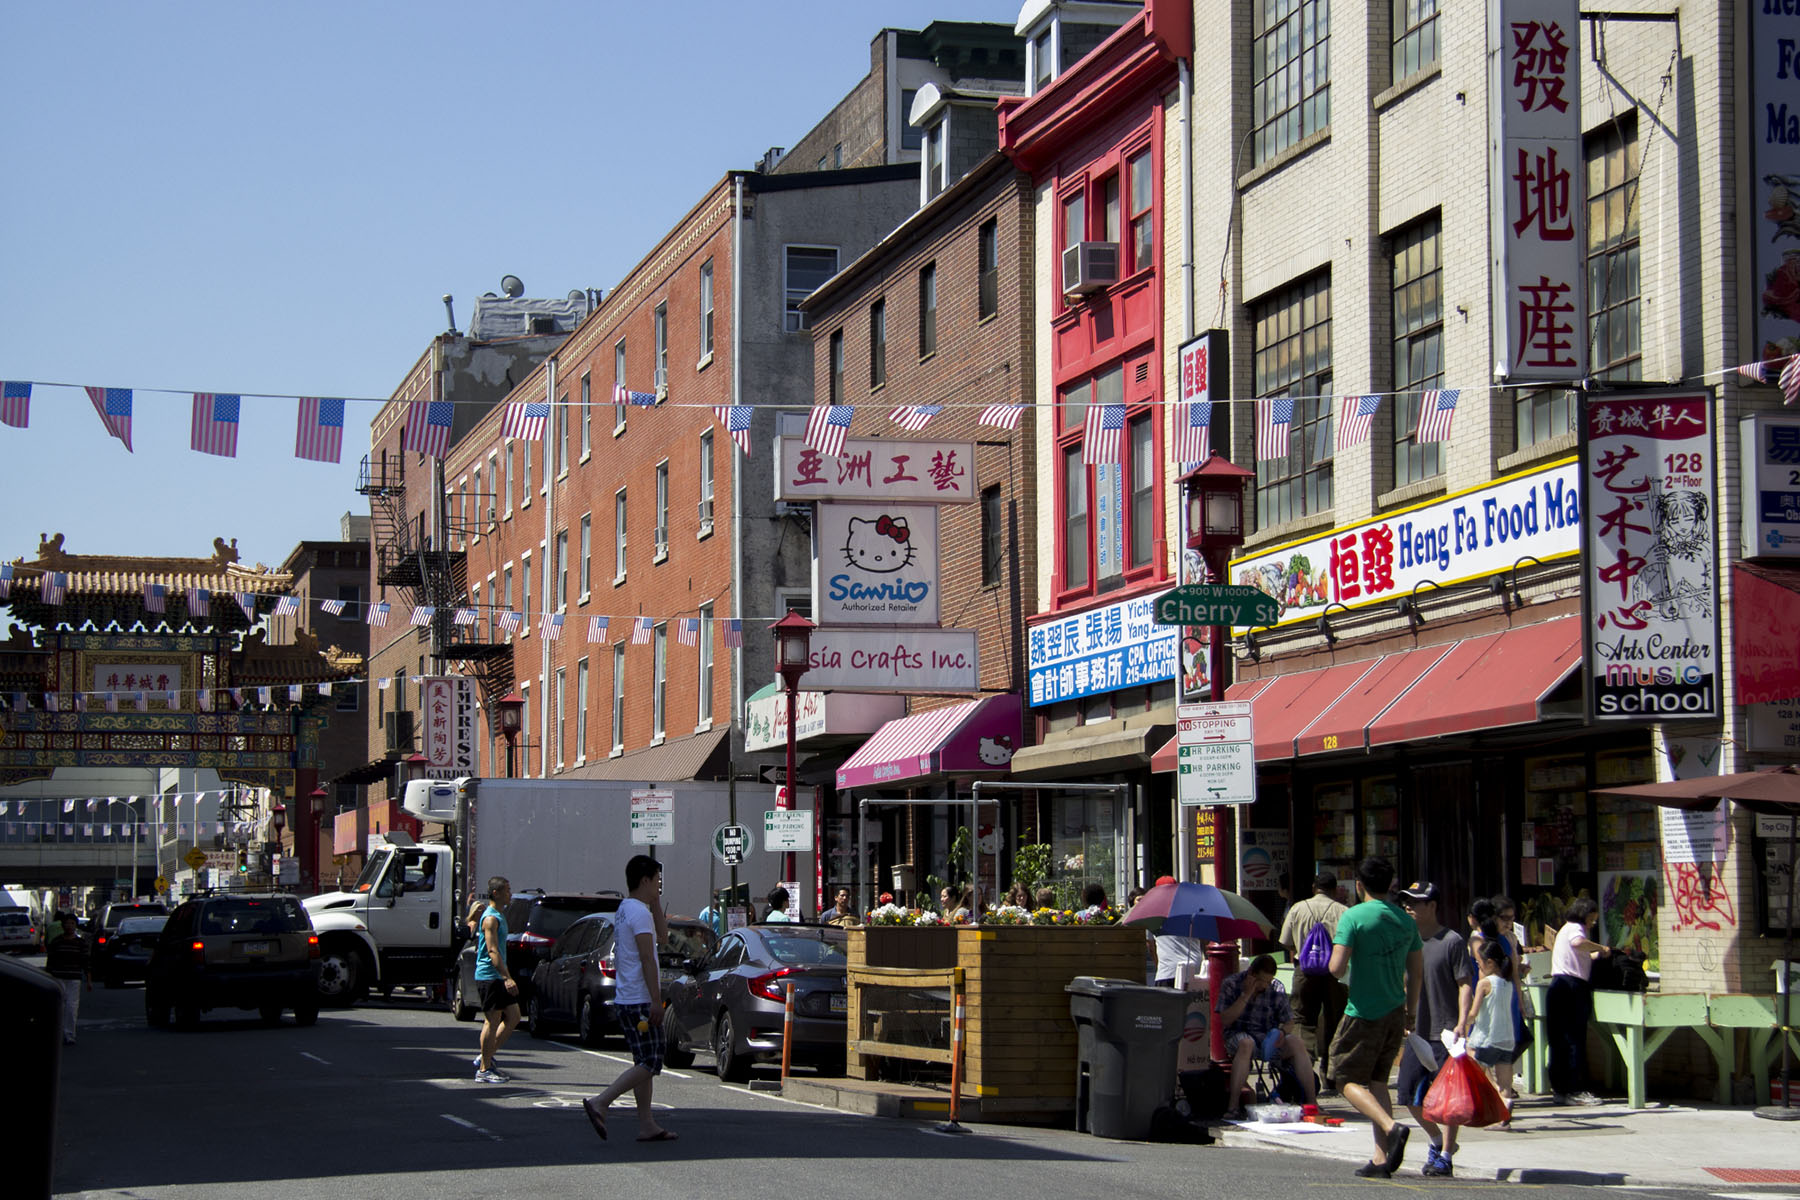 With a population of just over 30,000 at the last census, Chinese-Americans made up roughly one-third of Philadelphia’s Asian population, making them the biggest Asian ethnic group in the city. (Sami Edge/News21)